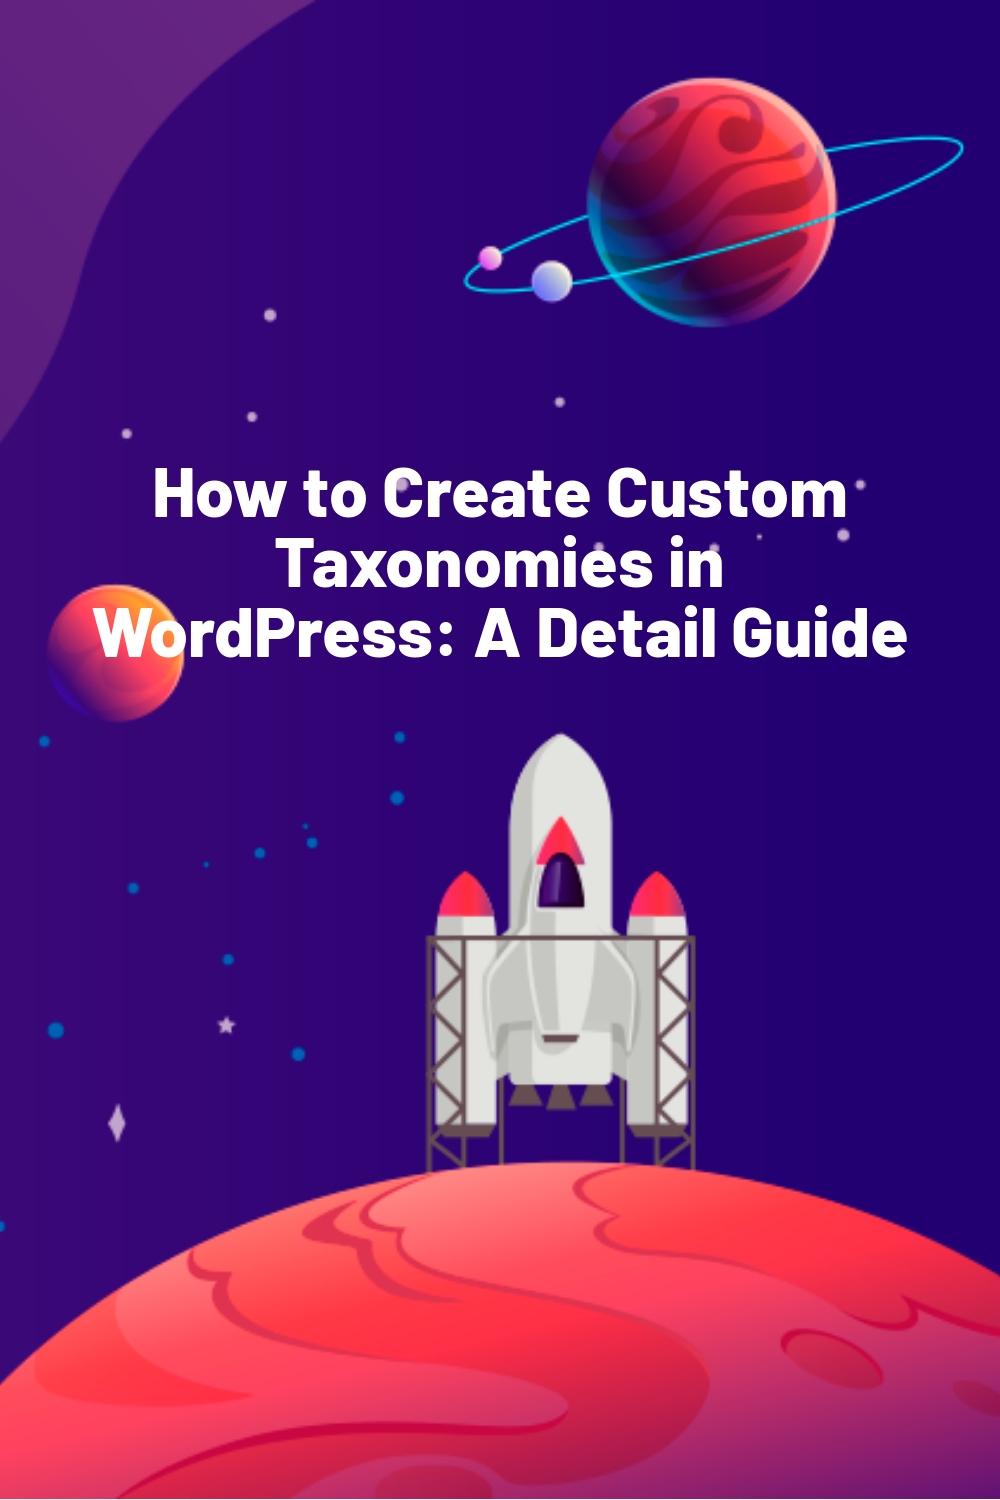 How to Create Custom Taxonomies in WordPress: A Detail Guide